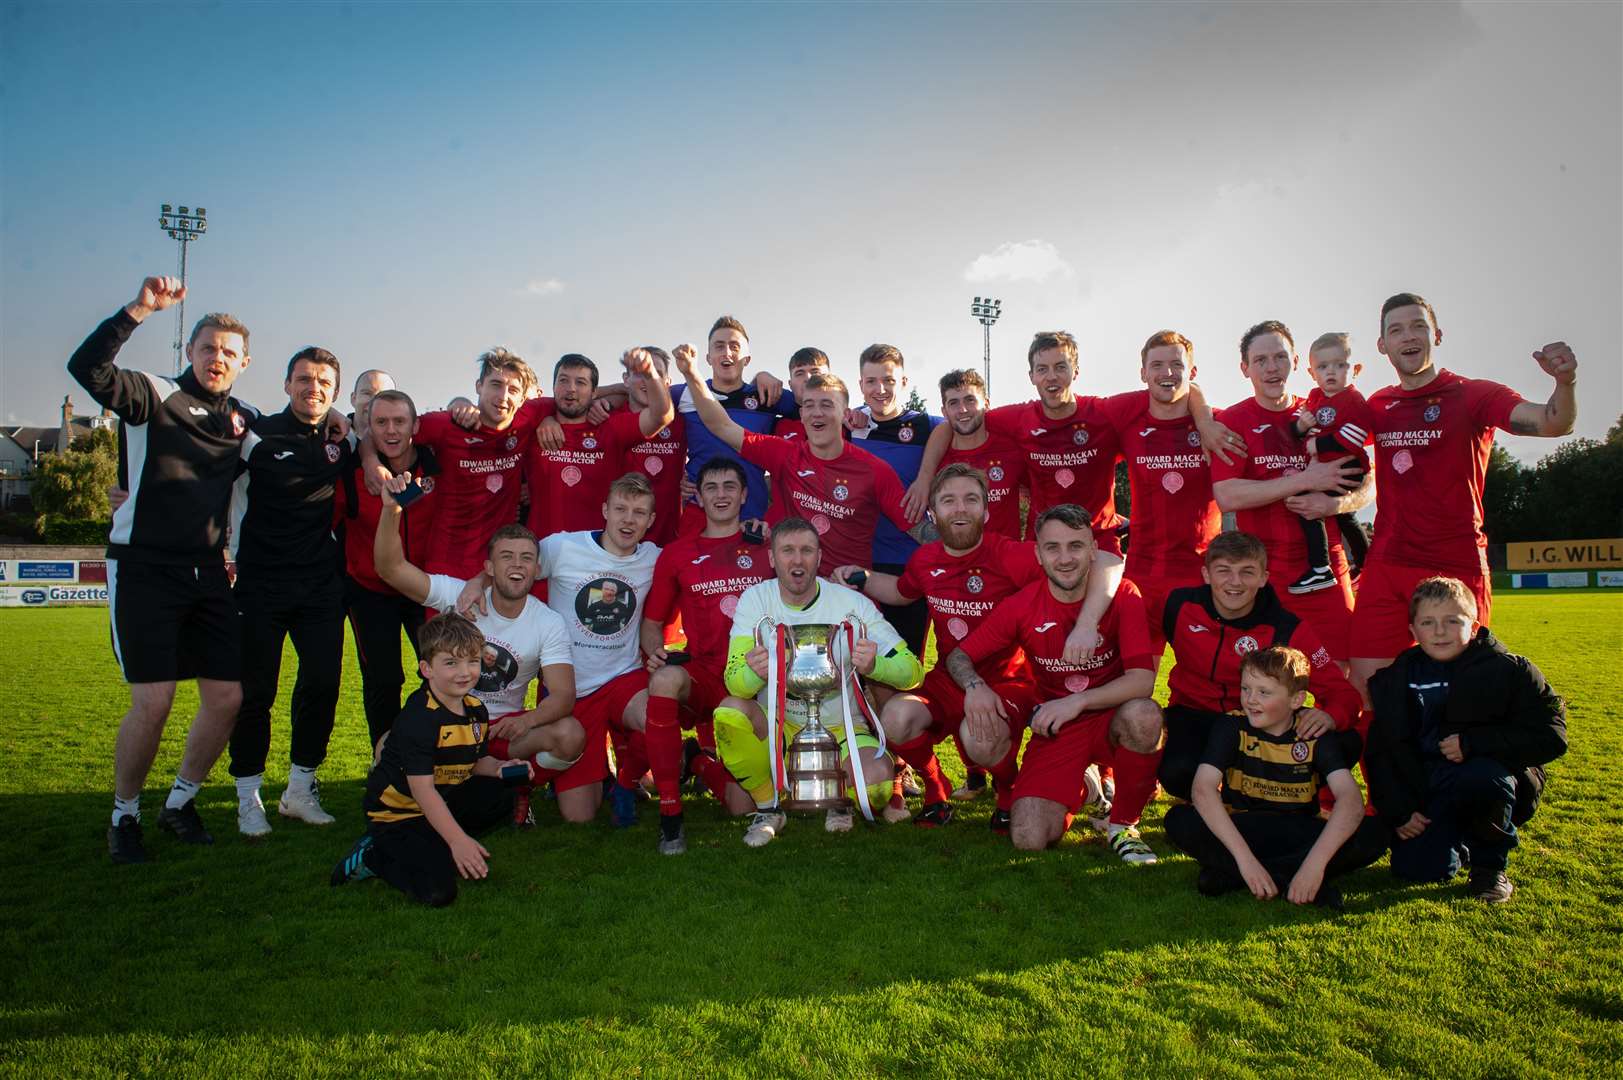 Brora Rangers won the Highland League and North of Scotland Cup last season. Picture: Callum Mackay